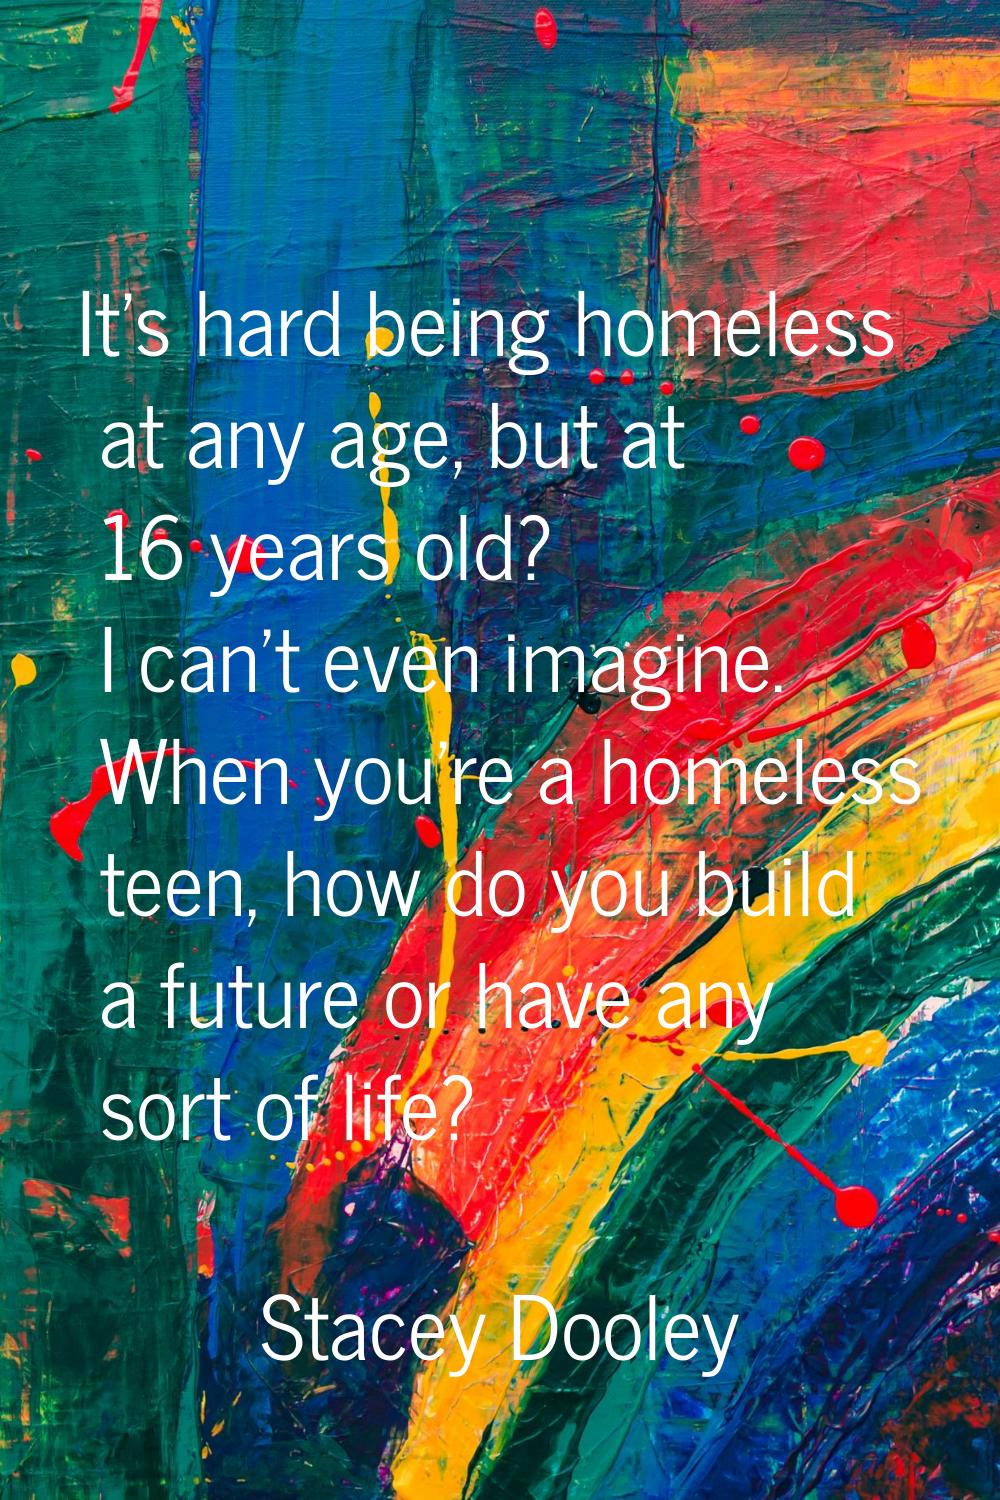 It's hard being homeless at any age, but at 16 years old? I can't even imagine. When you're a homel